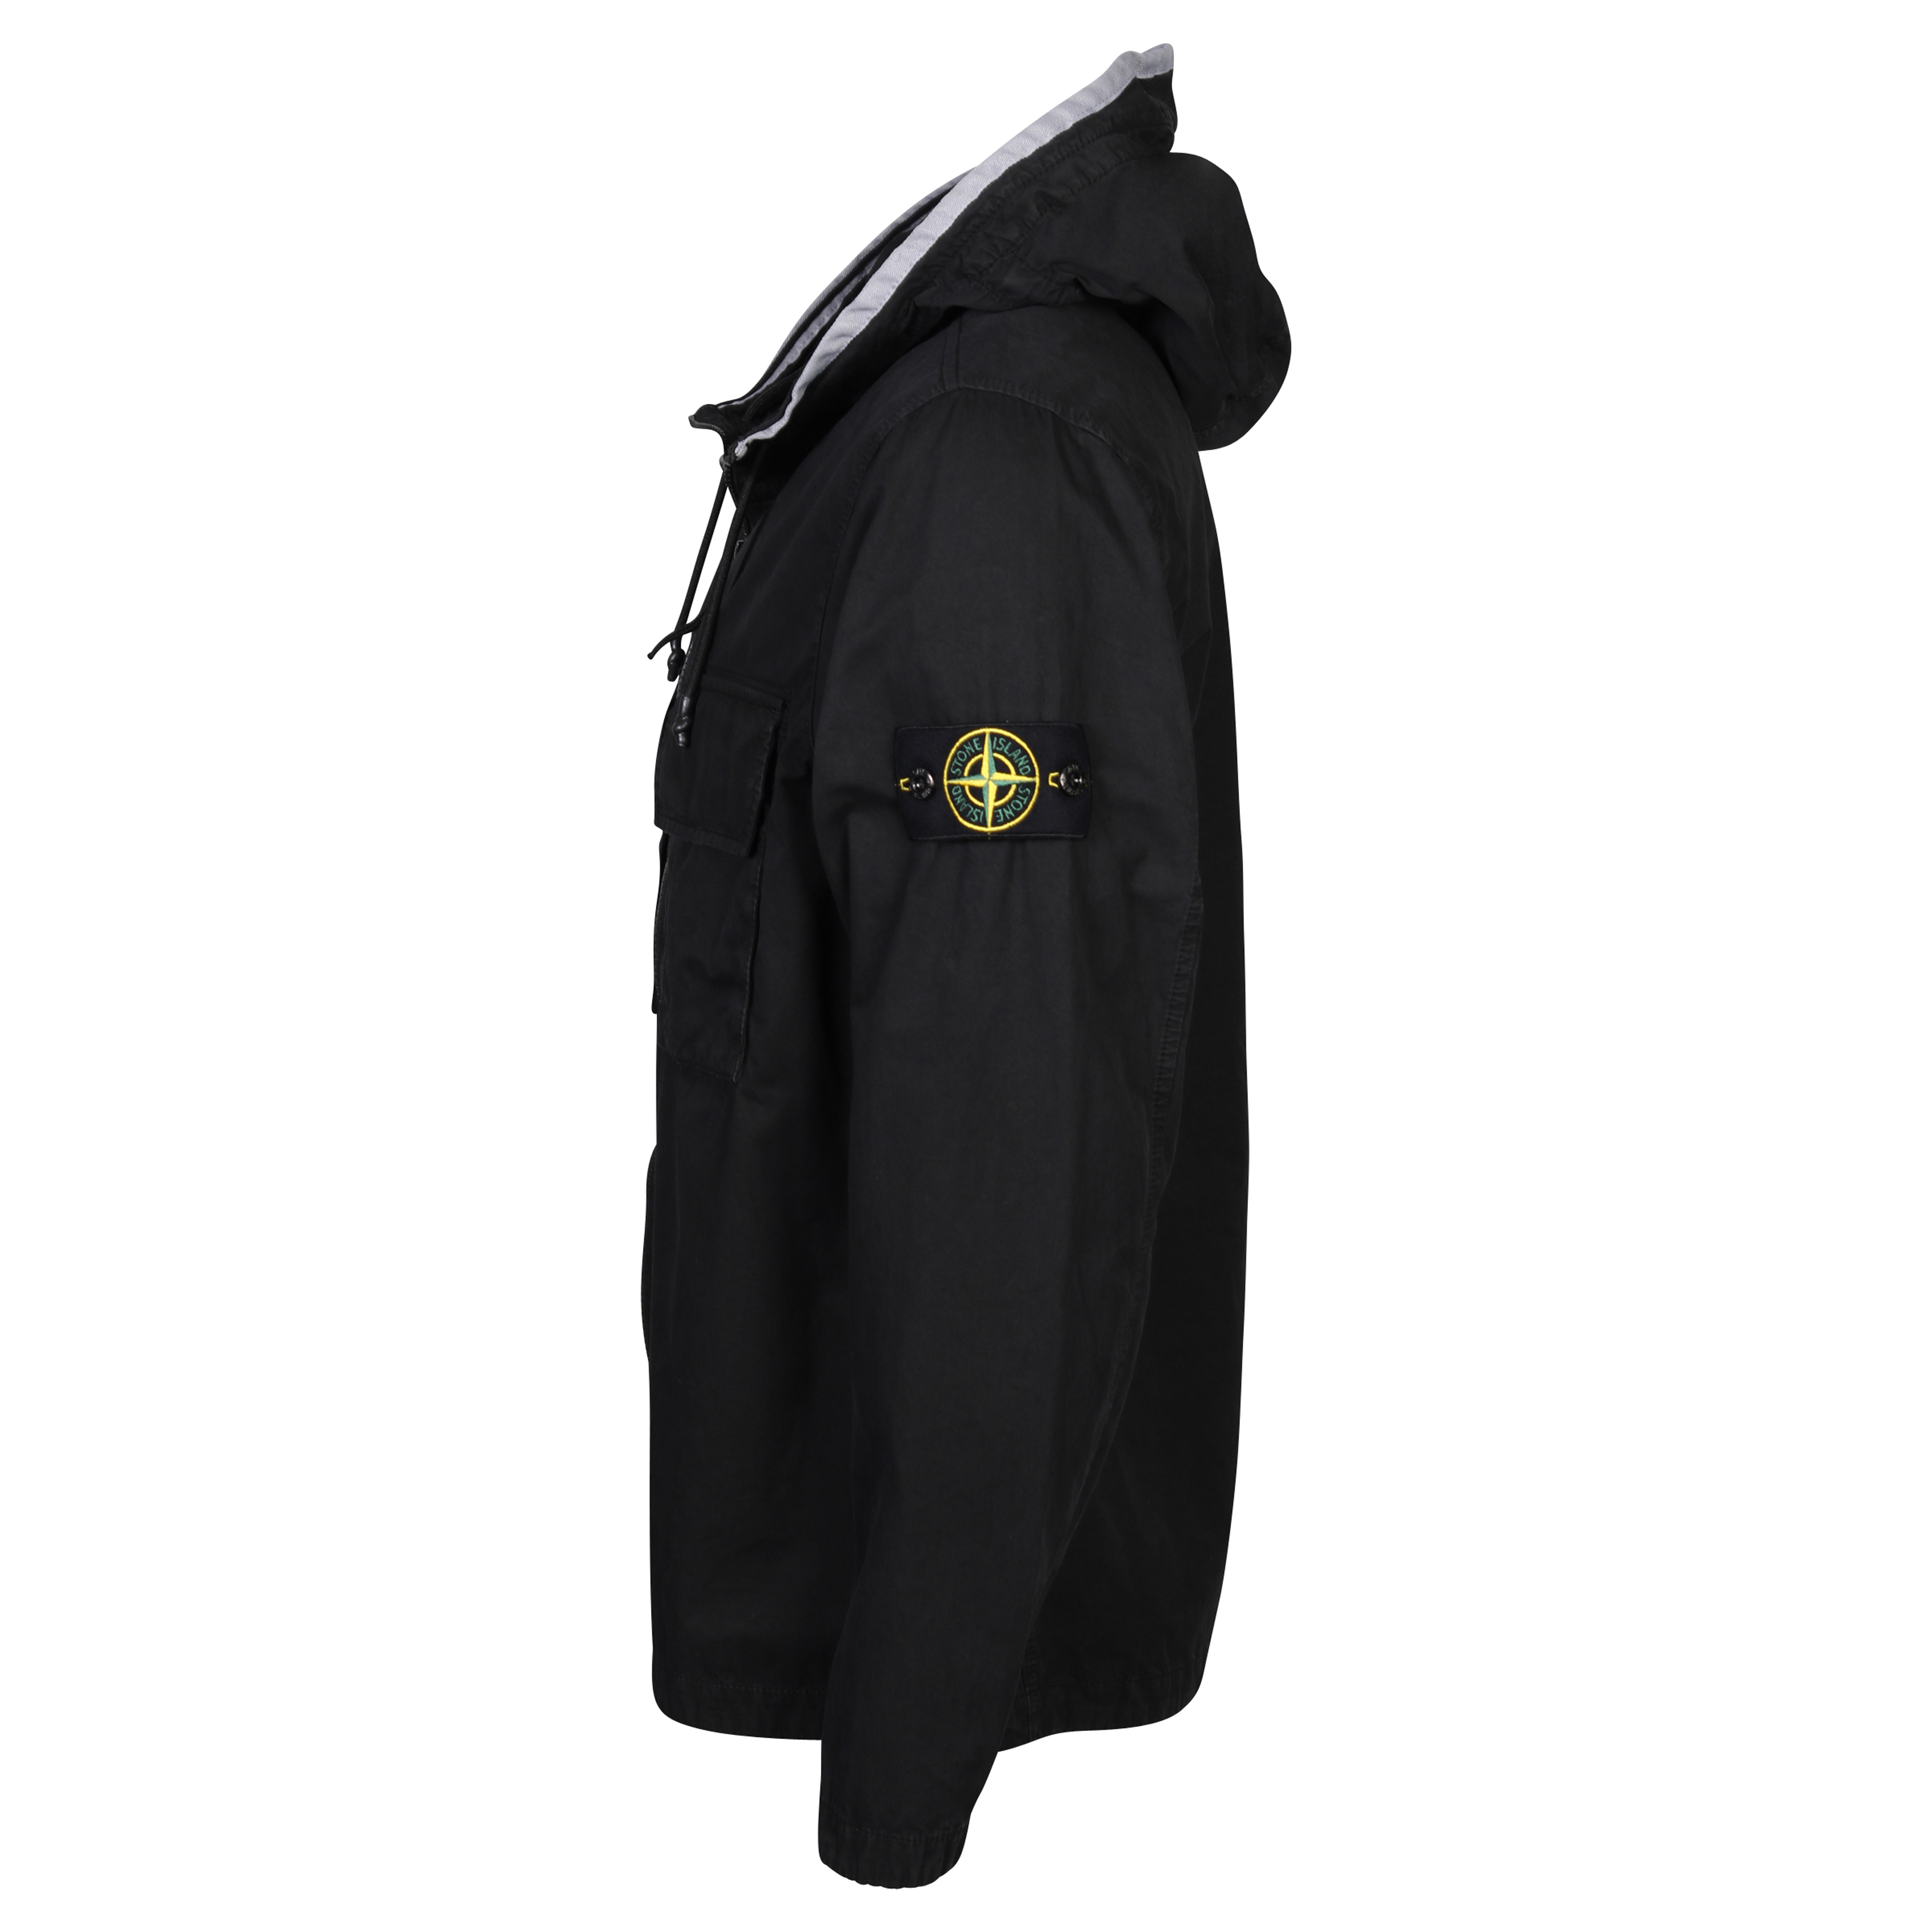 Stone Island Cotton Hooded Overshirt in Washed Black 3XL